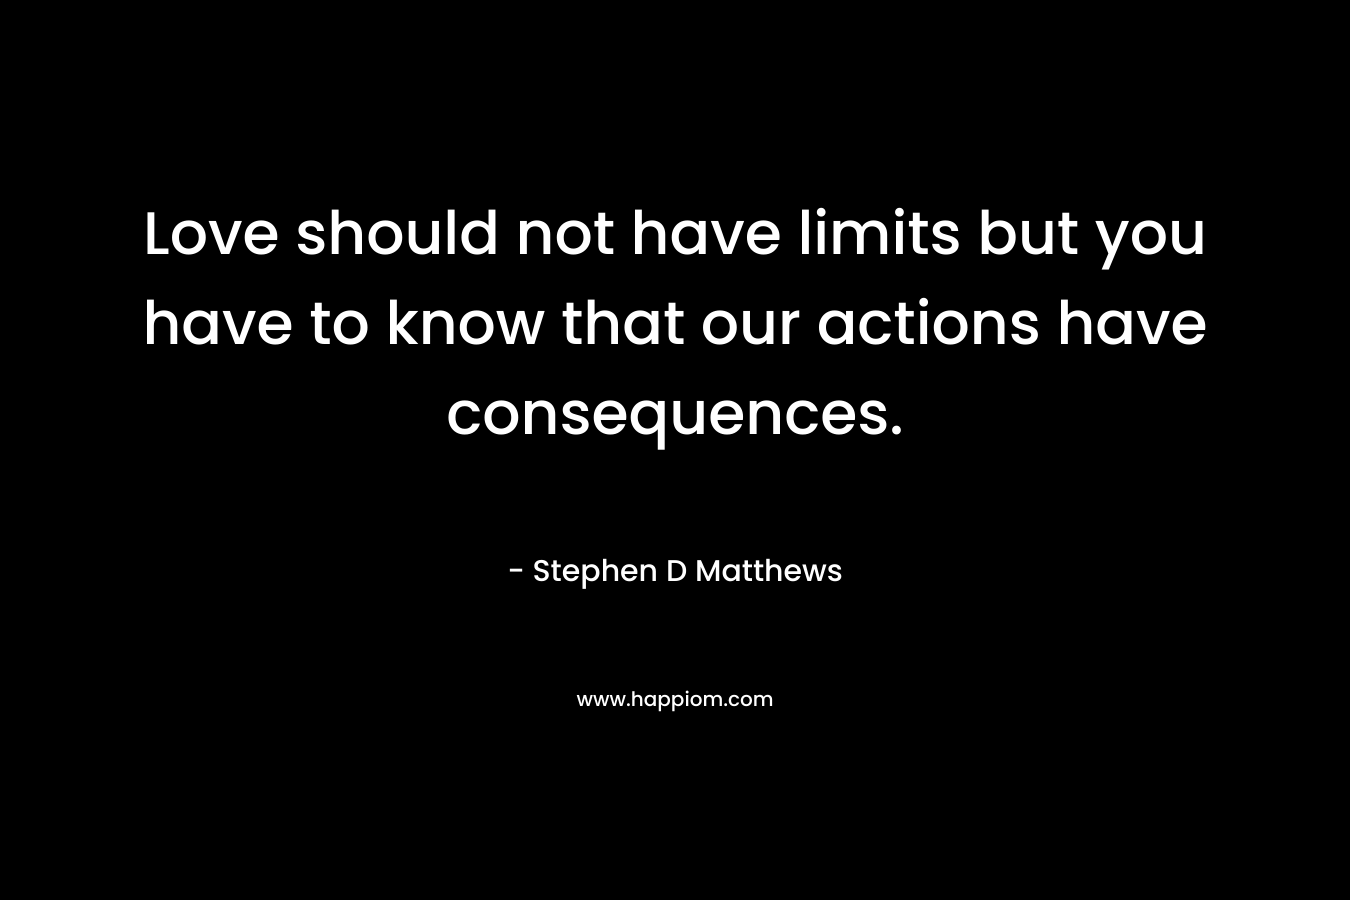 Love should not have limits but you have to know that our actions have consequences.